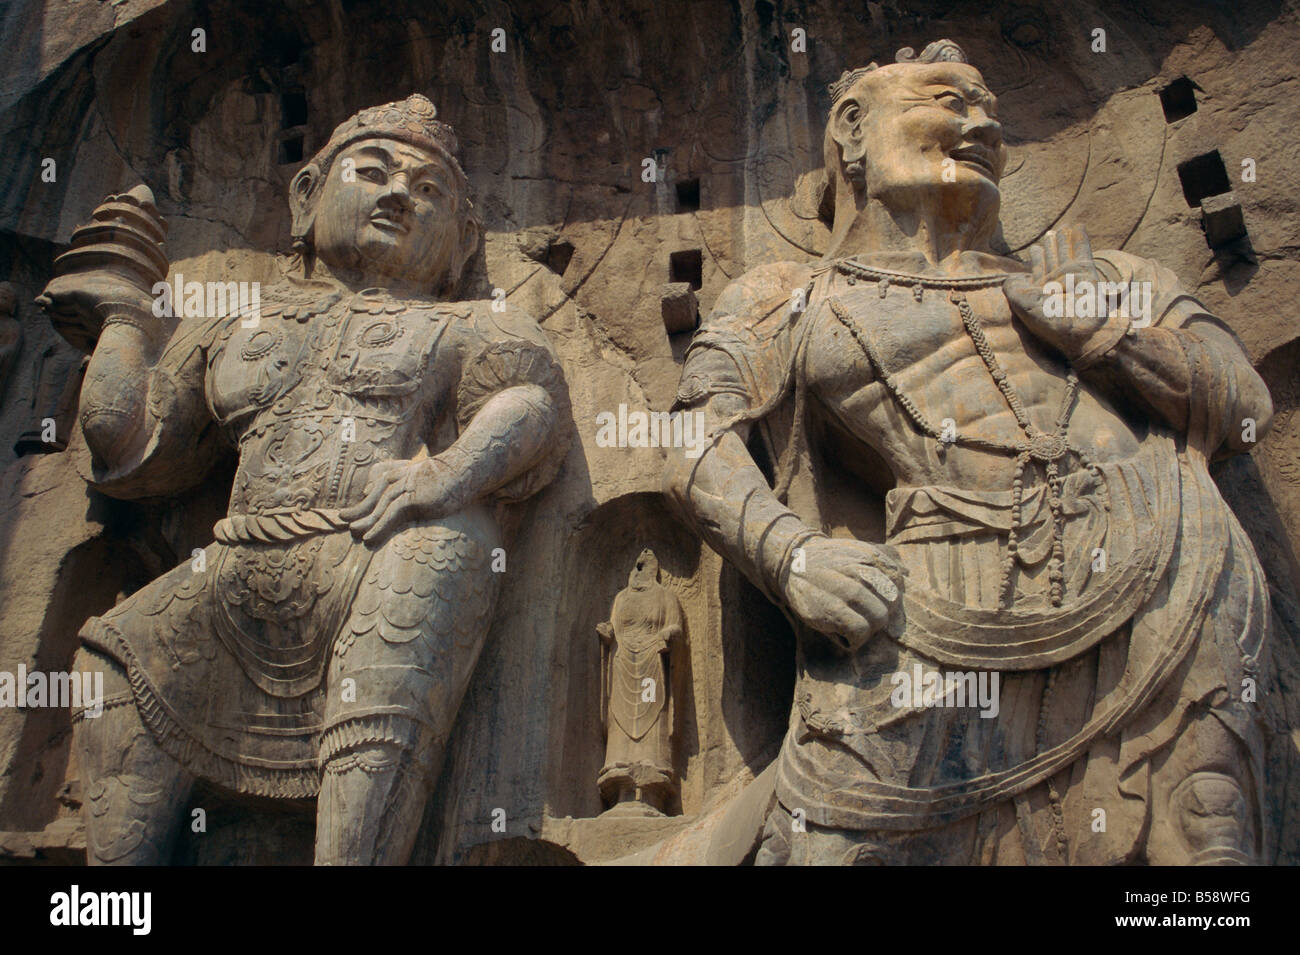 Statues carved in the rock at the Longman Buddhist caves at Luoyang Hunan Province China J Sweeney Stock Photo